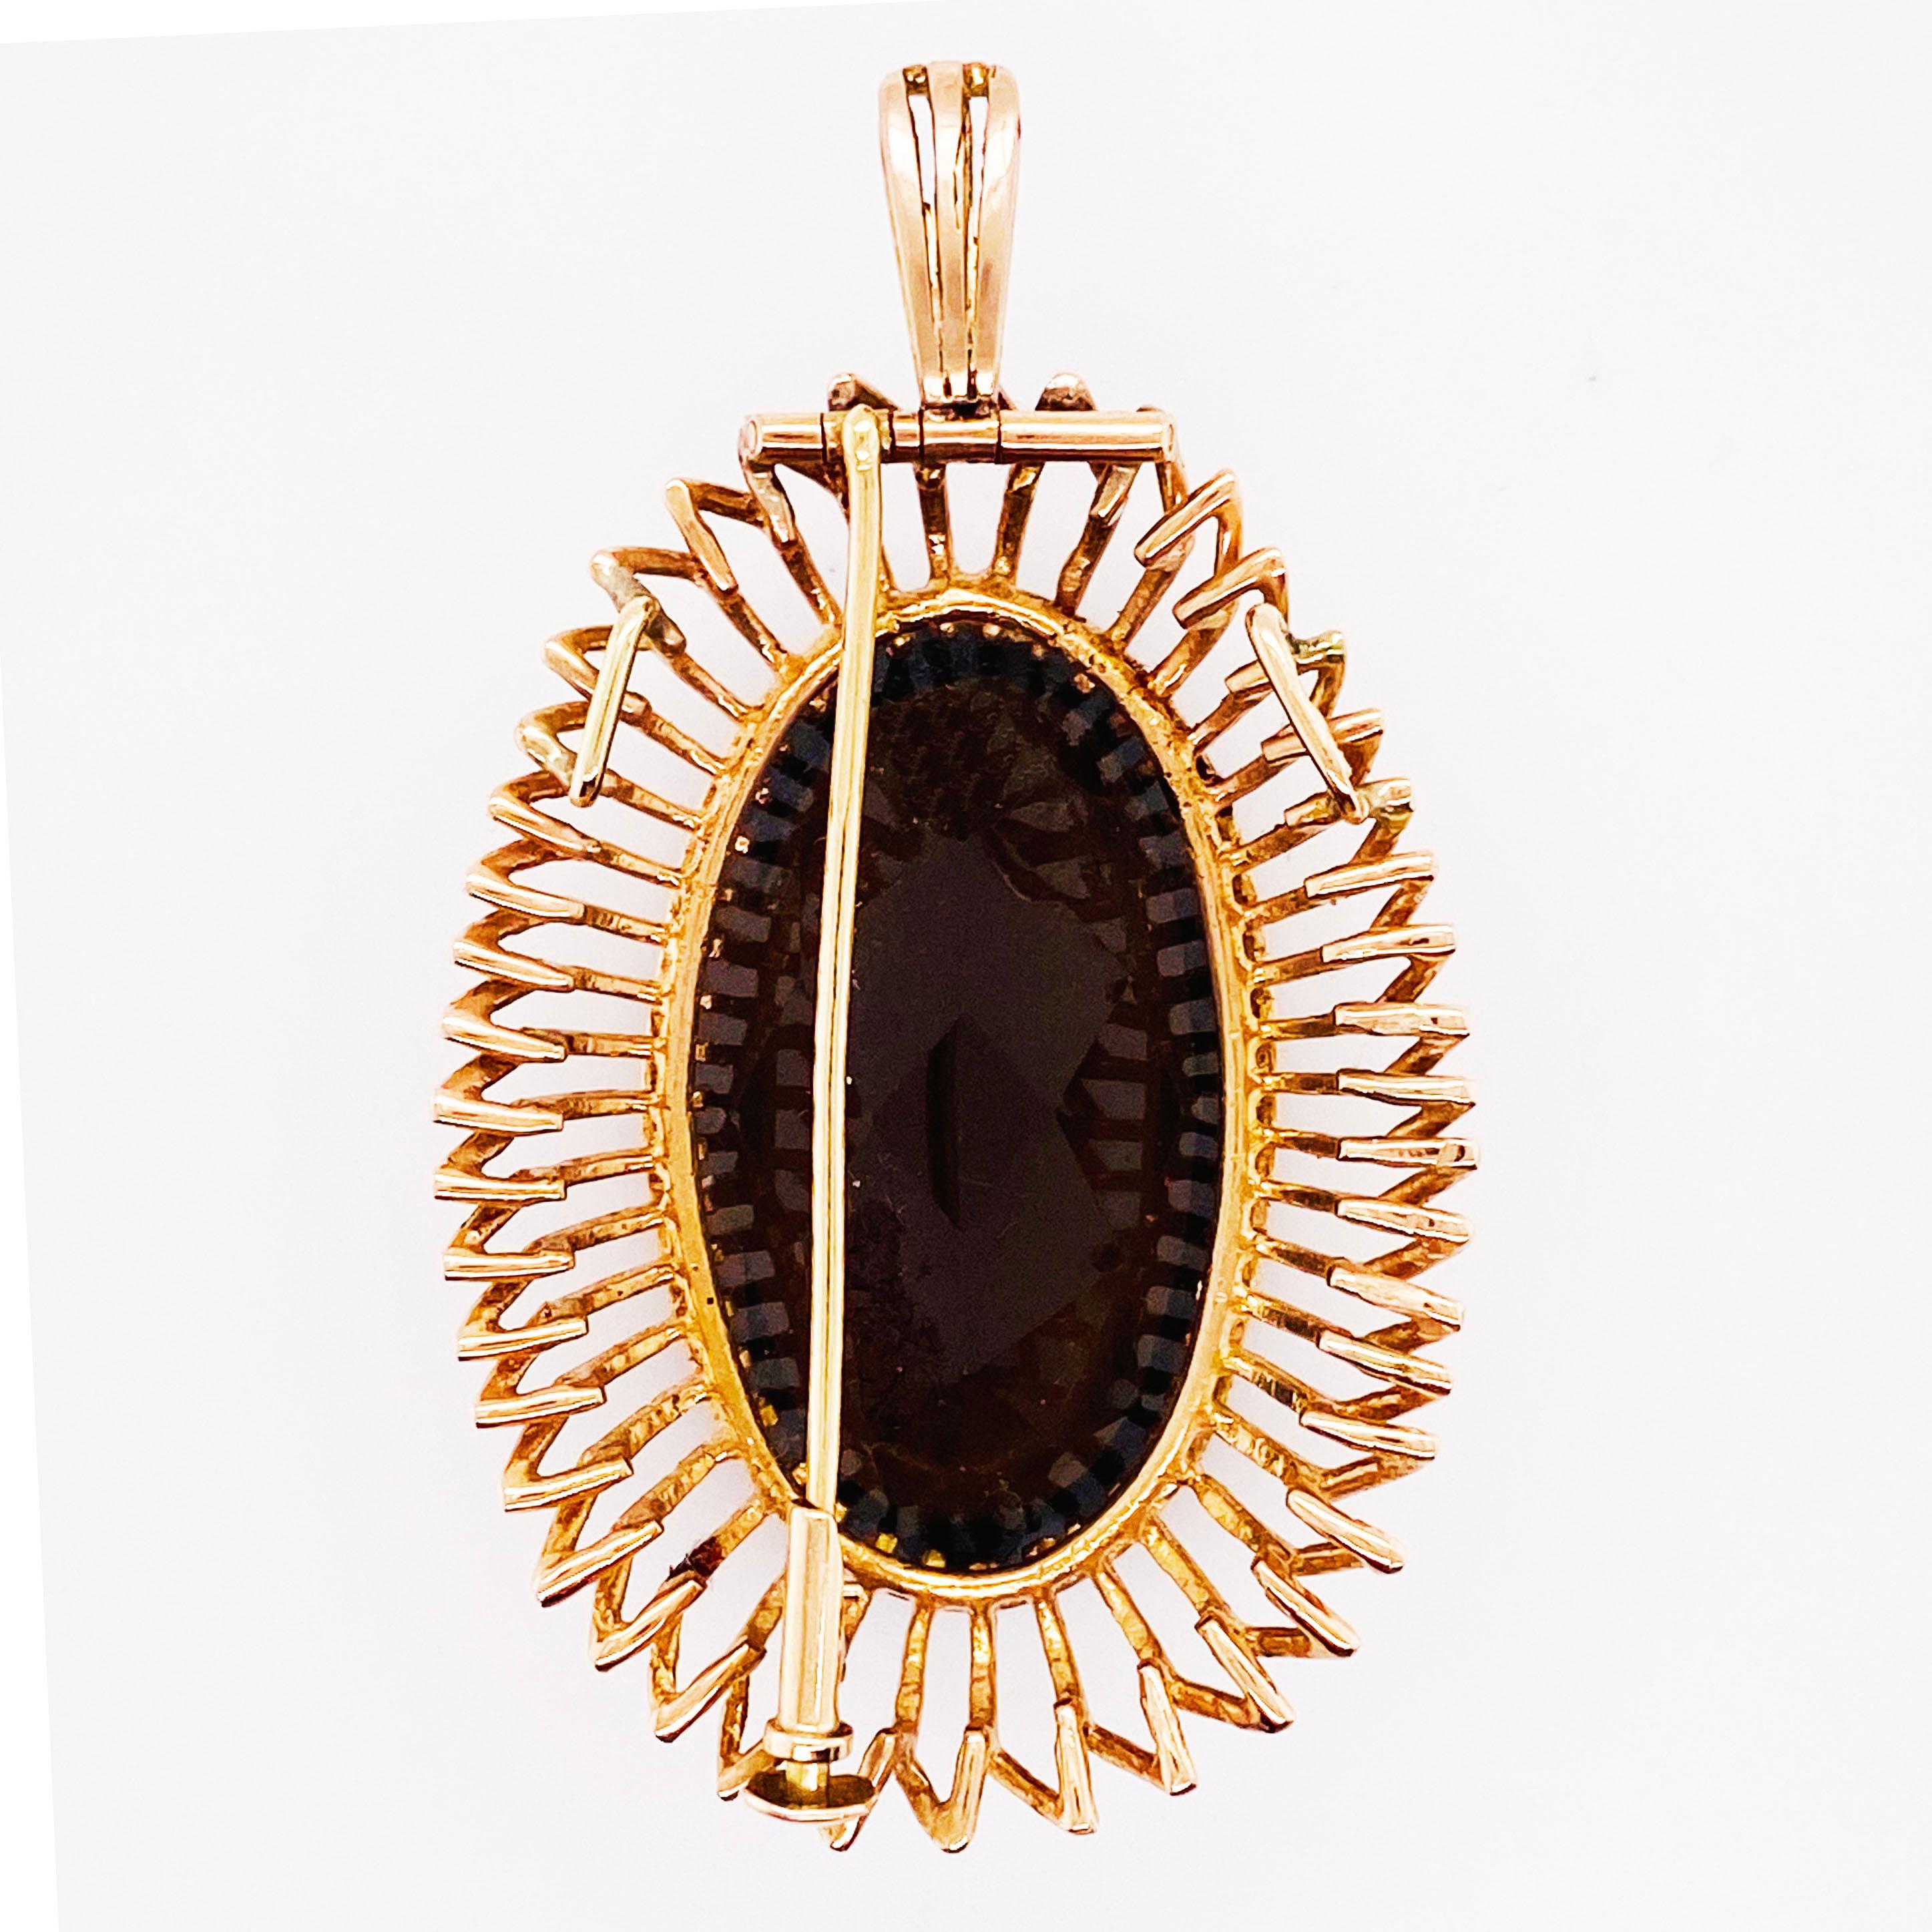 This gorgeous piece is made with a genuine smoky quartz gemstone set in an eight prong antique inspired setting. The smoky quartz gets its name from its natural, rich smoky orange-ish brown color. The oval, faceted smoky quartz has been hand cut and